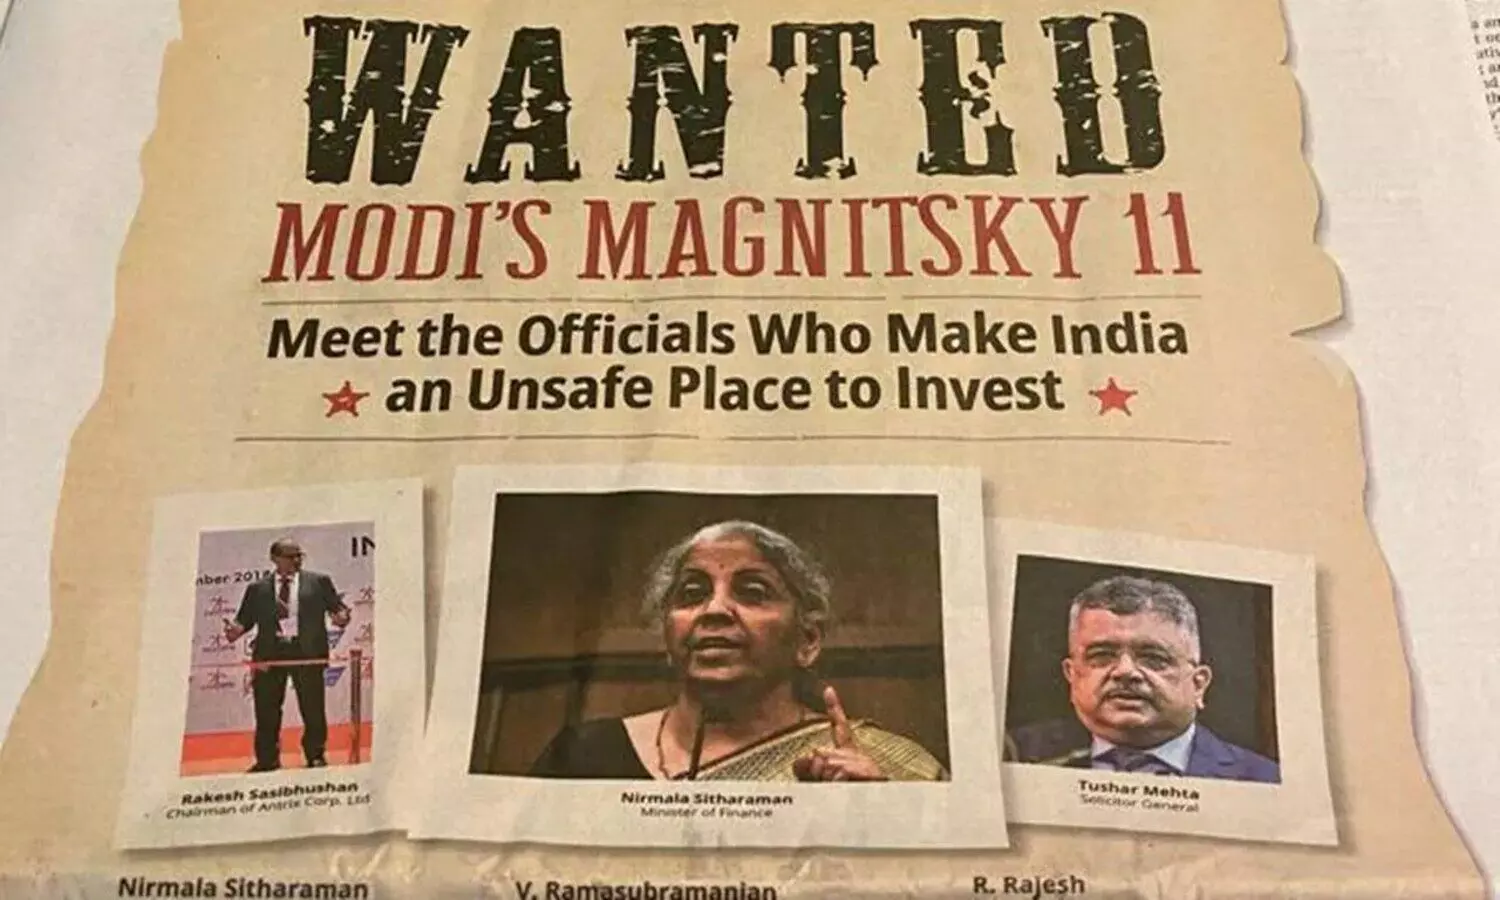 WSJ Ad Against Indian Ministers: